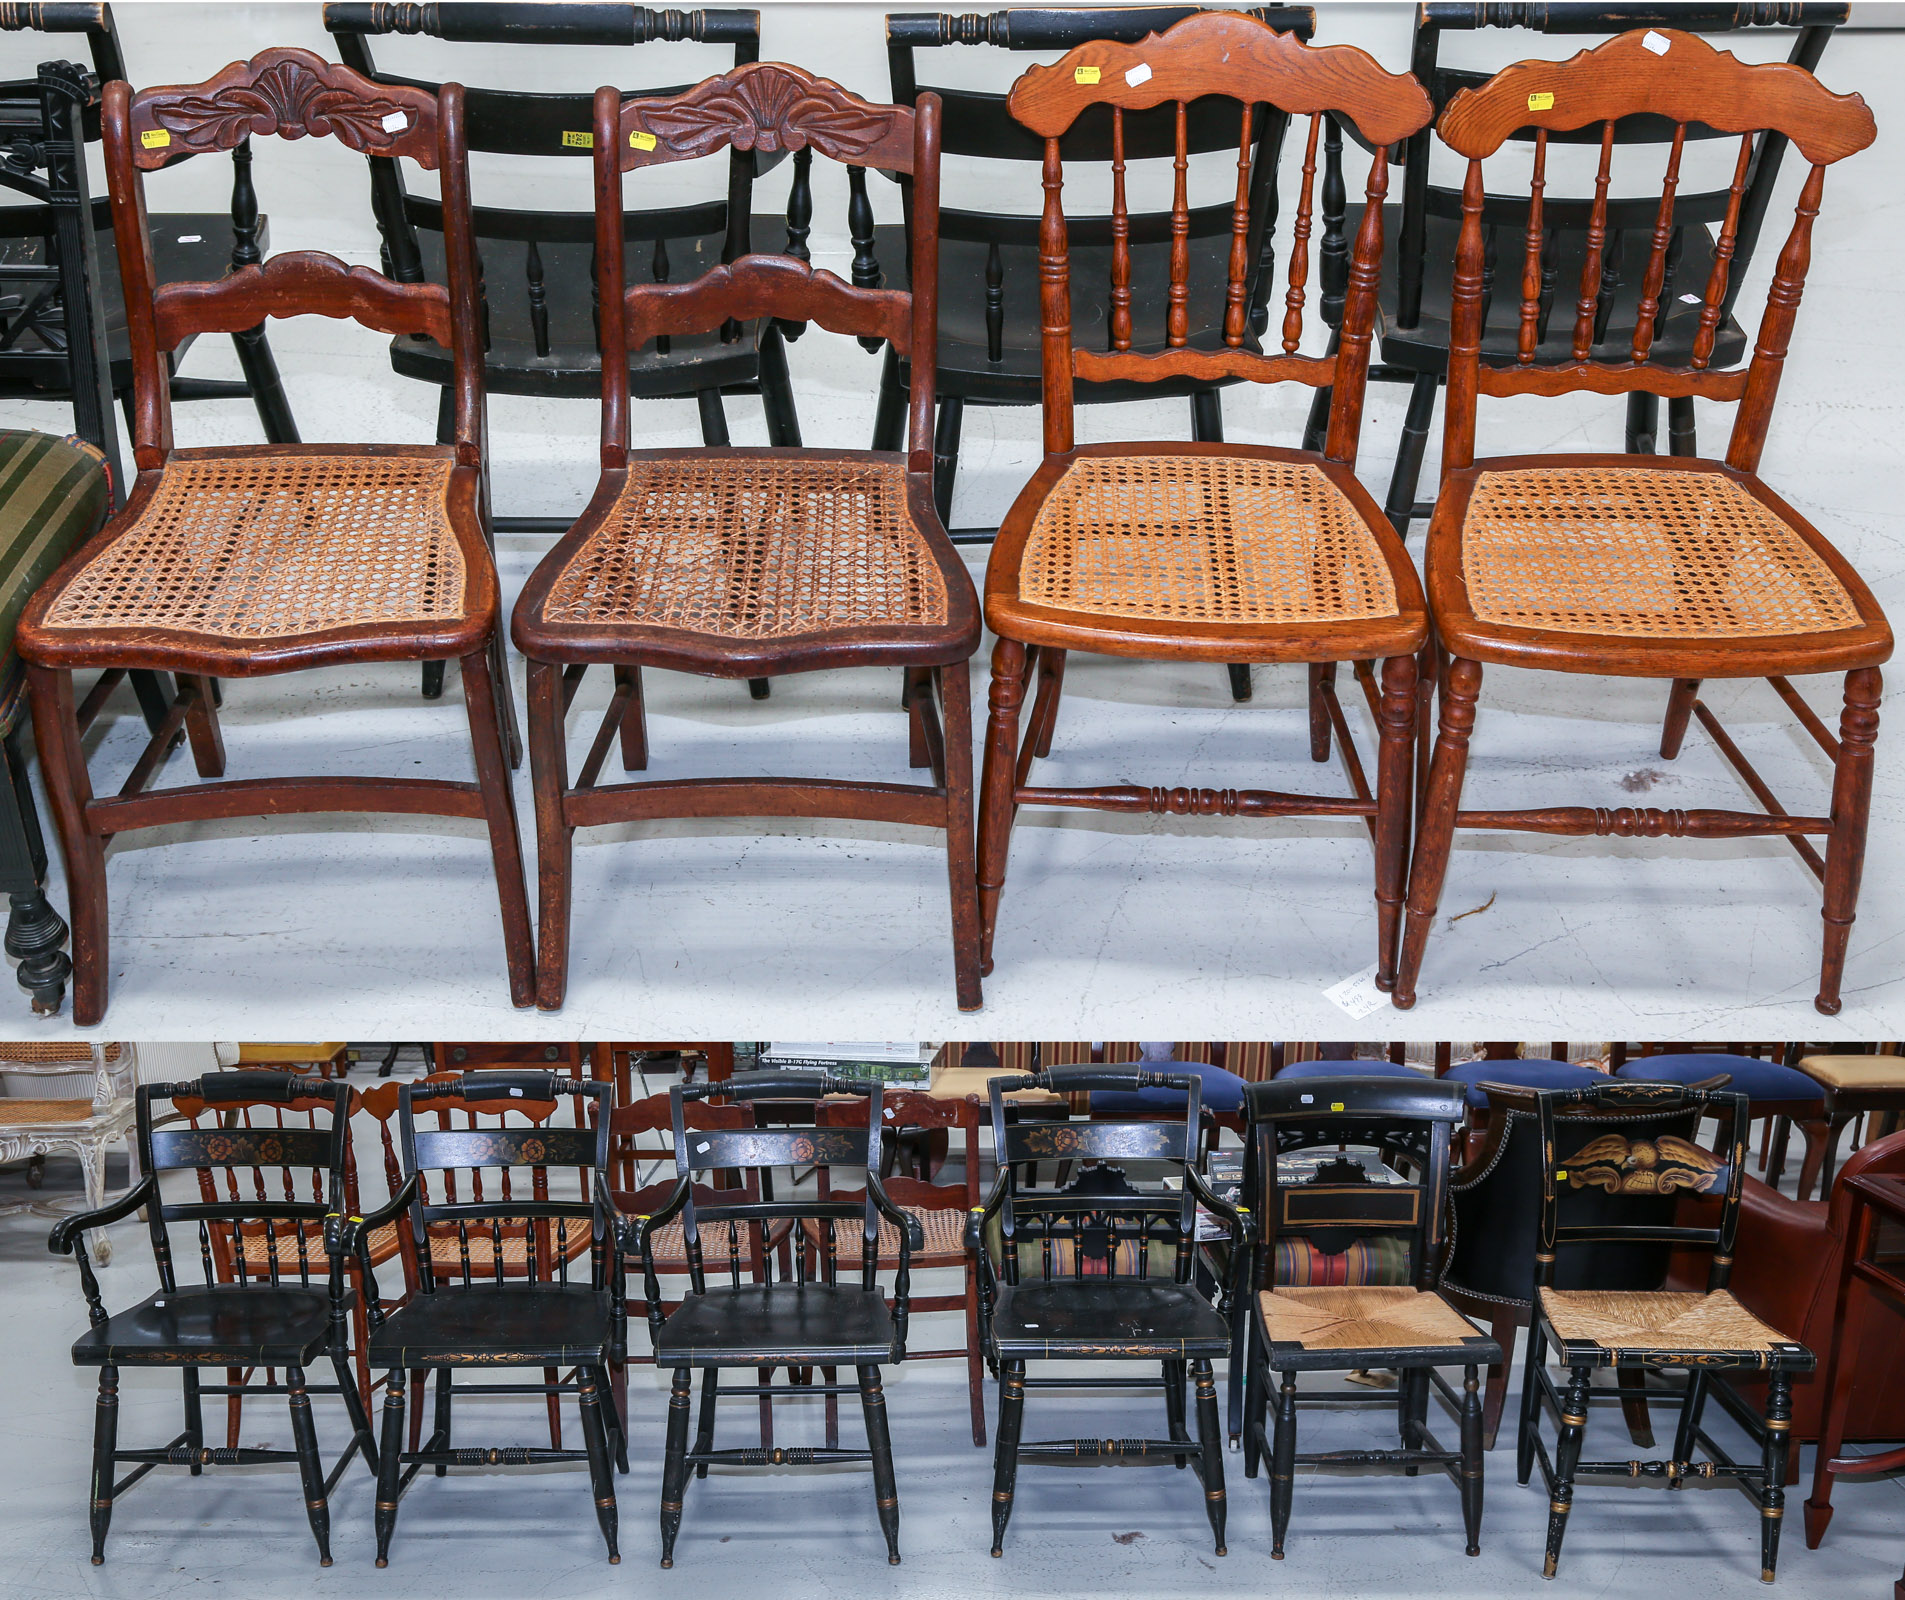 GROUP OF EIGHT CHAIRS Including 3b24d3